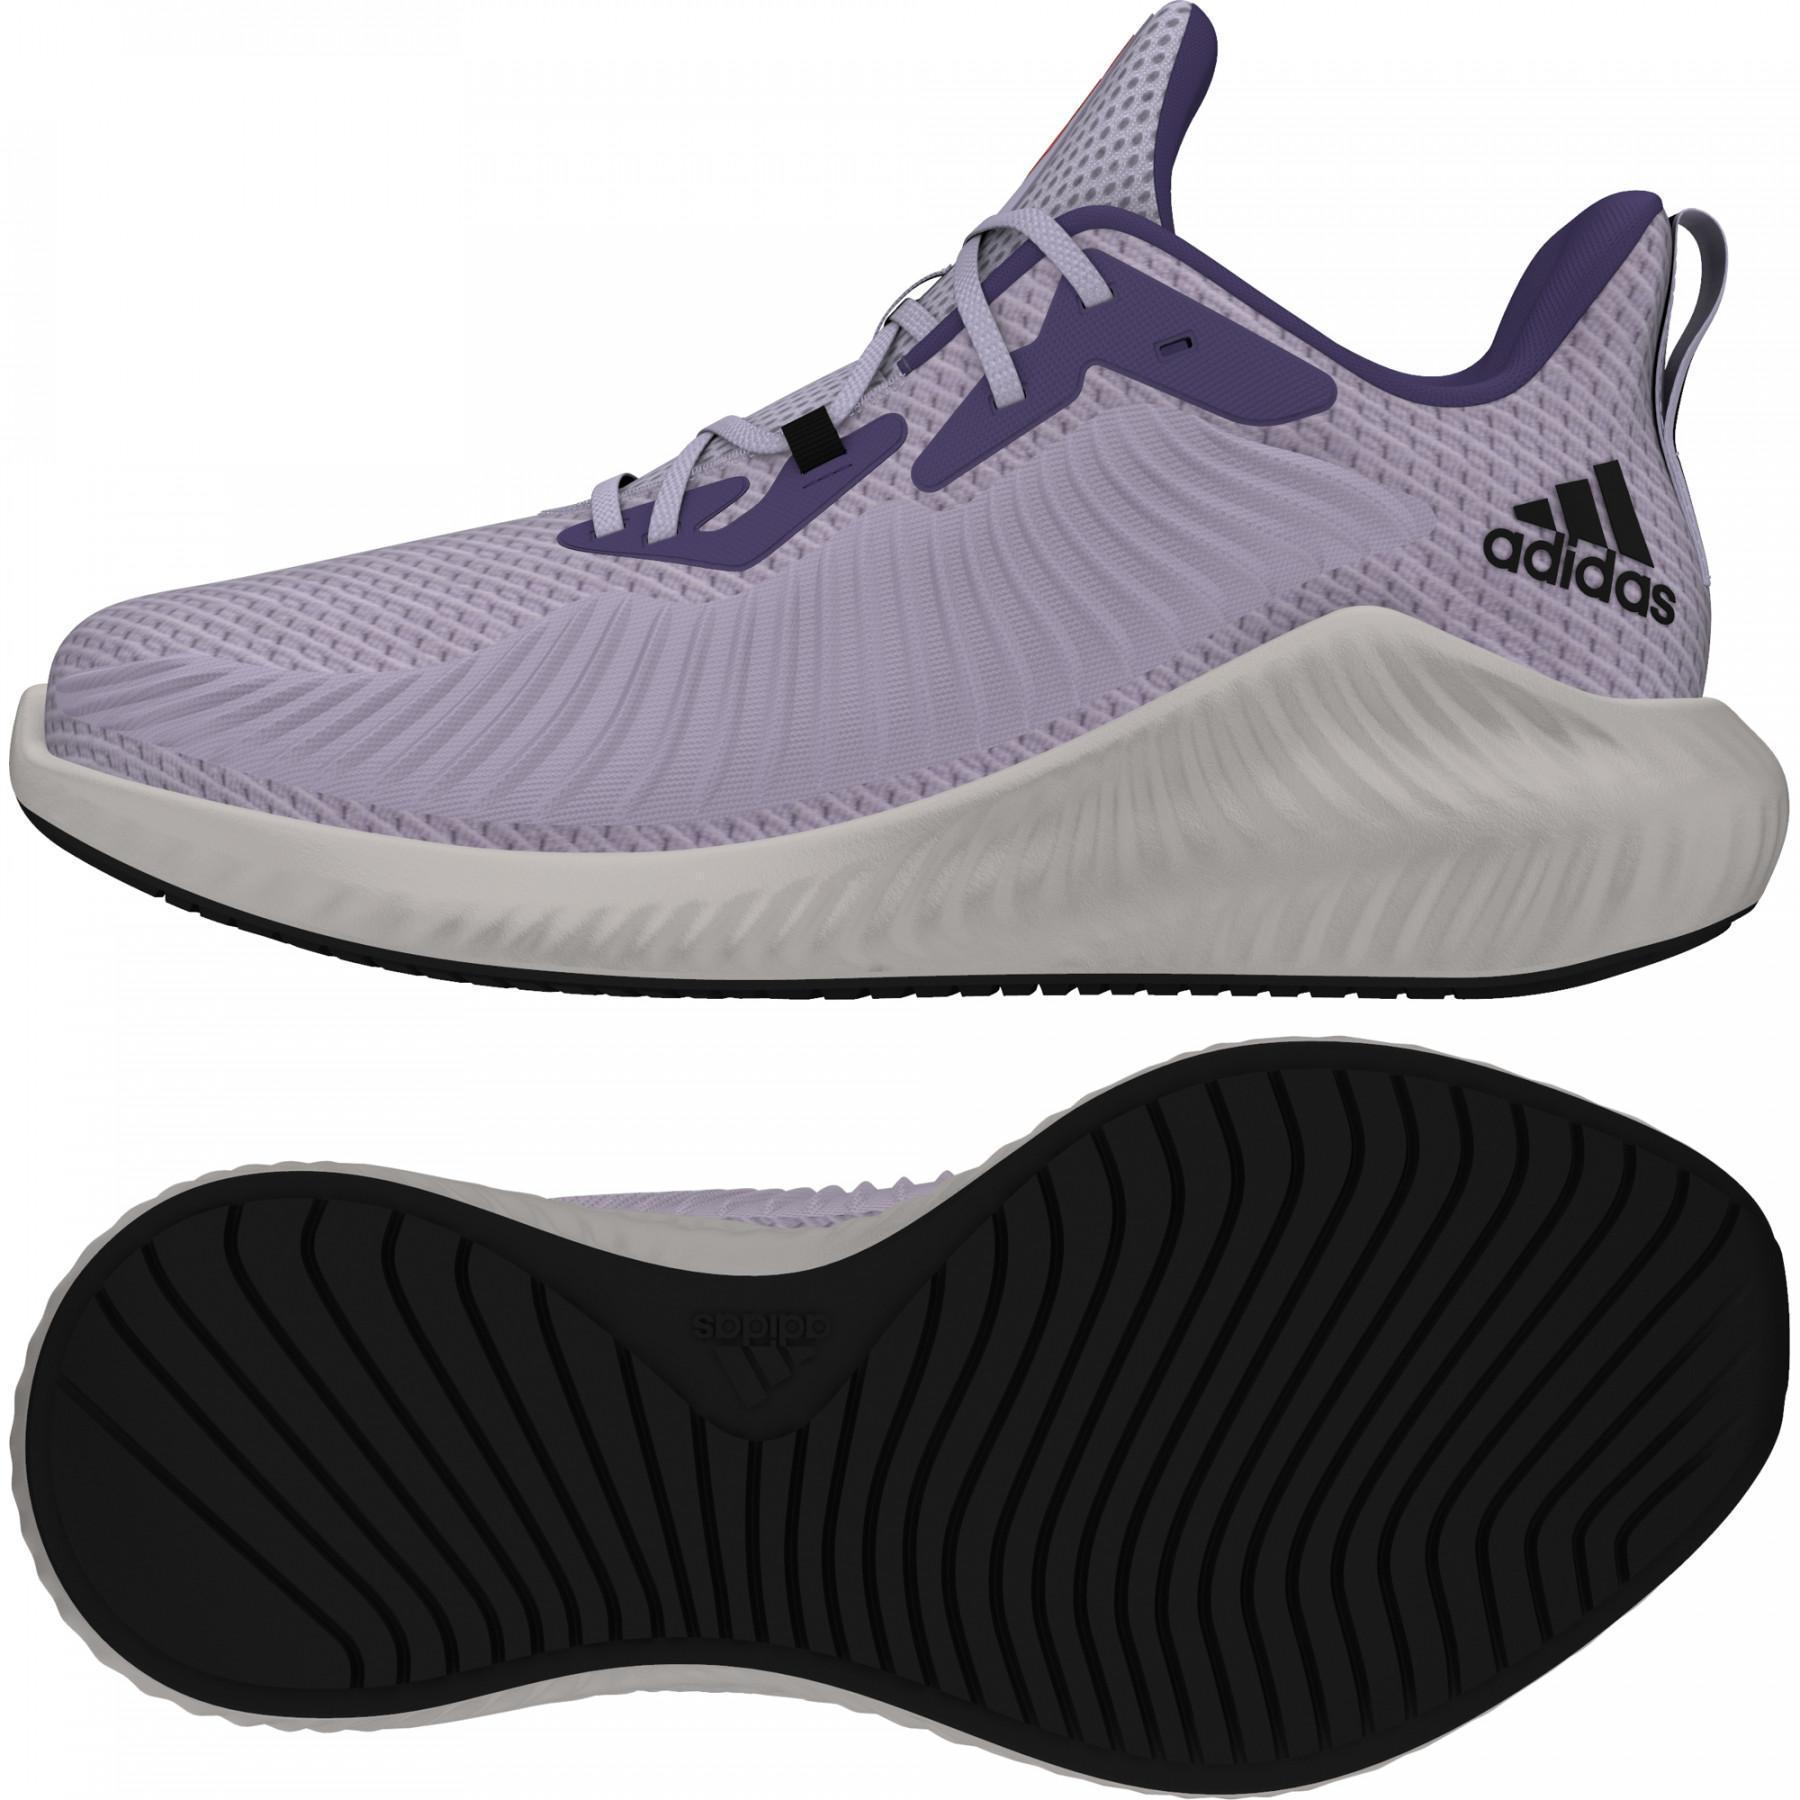 Women's sneakers adidas Alphabounce+